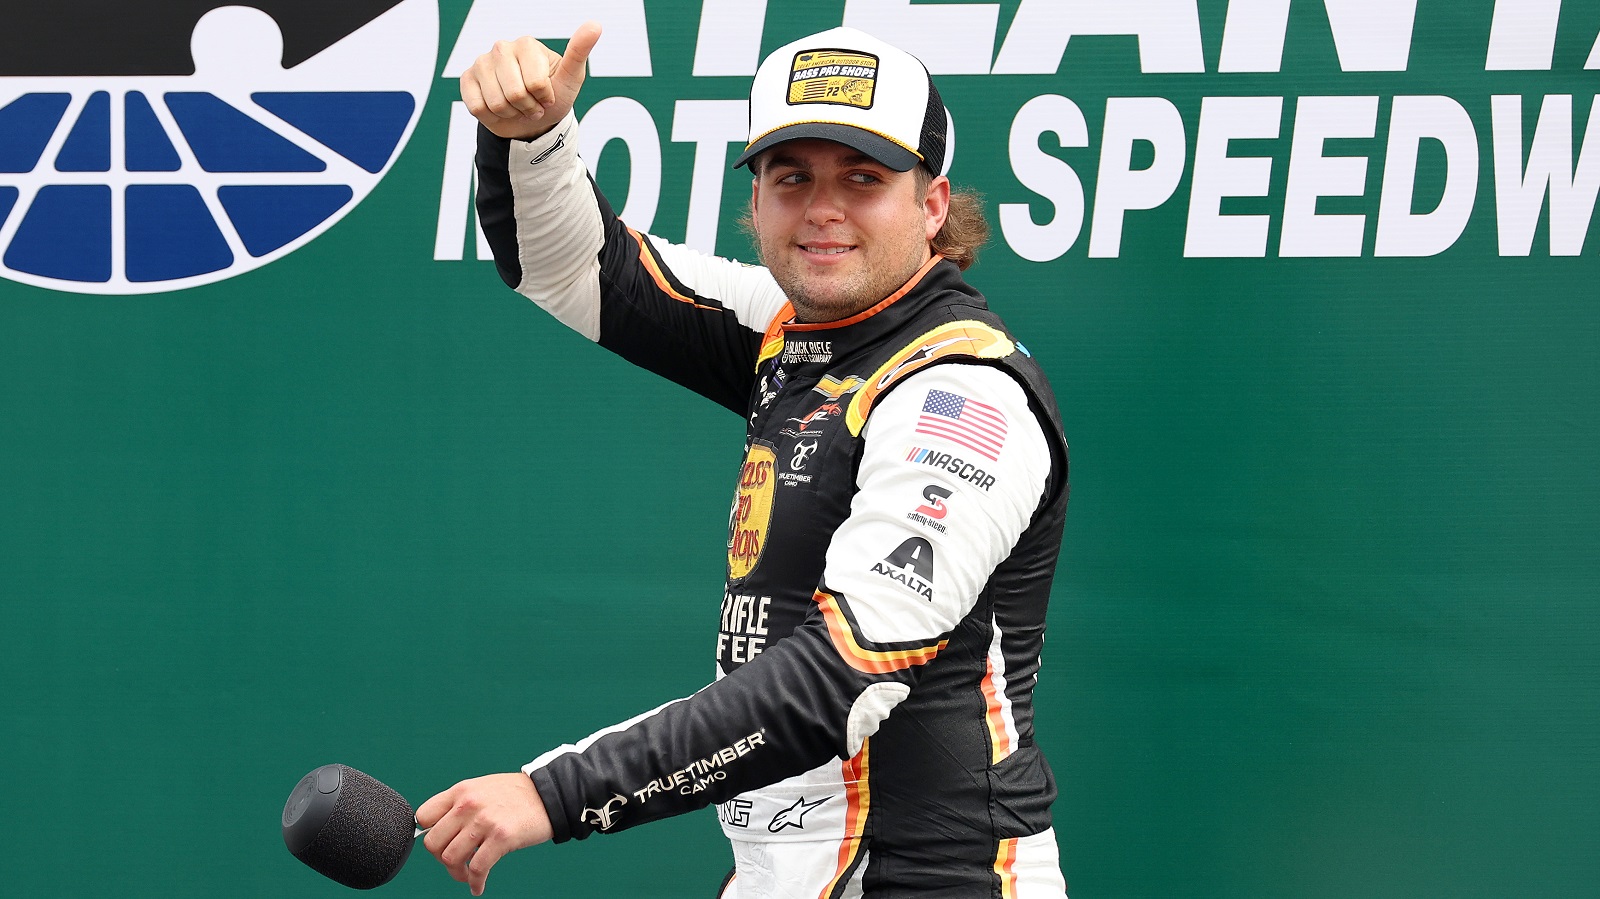 Noah Gragson waves to fans as he walks onstage during driver intros prior to the NASCAR Xfinity Series Alsco Uniforms 250 at Atlanta Motor Speedway on July 9, 2022. | James Gilbert/Getty Images